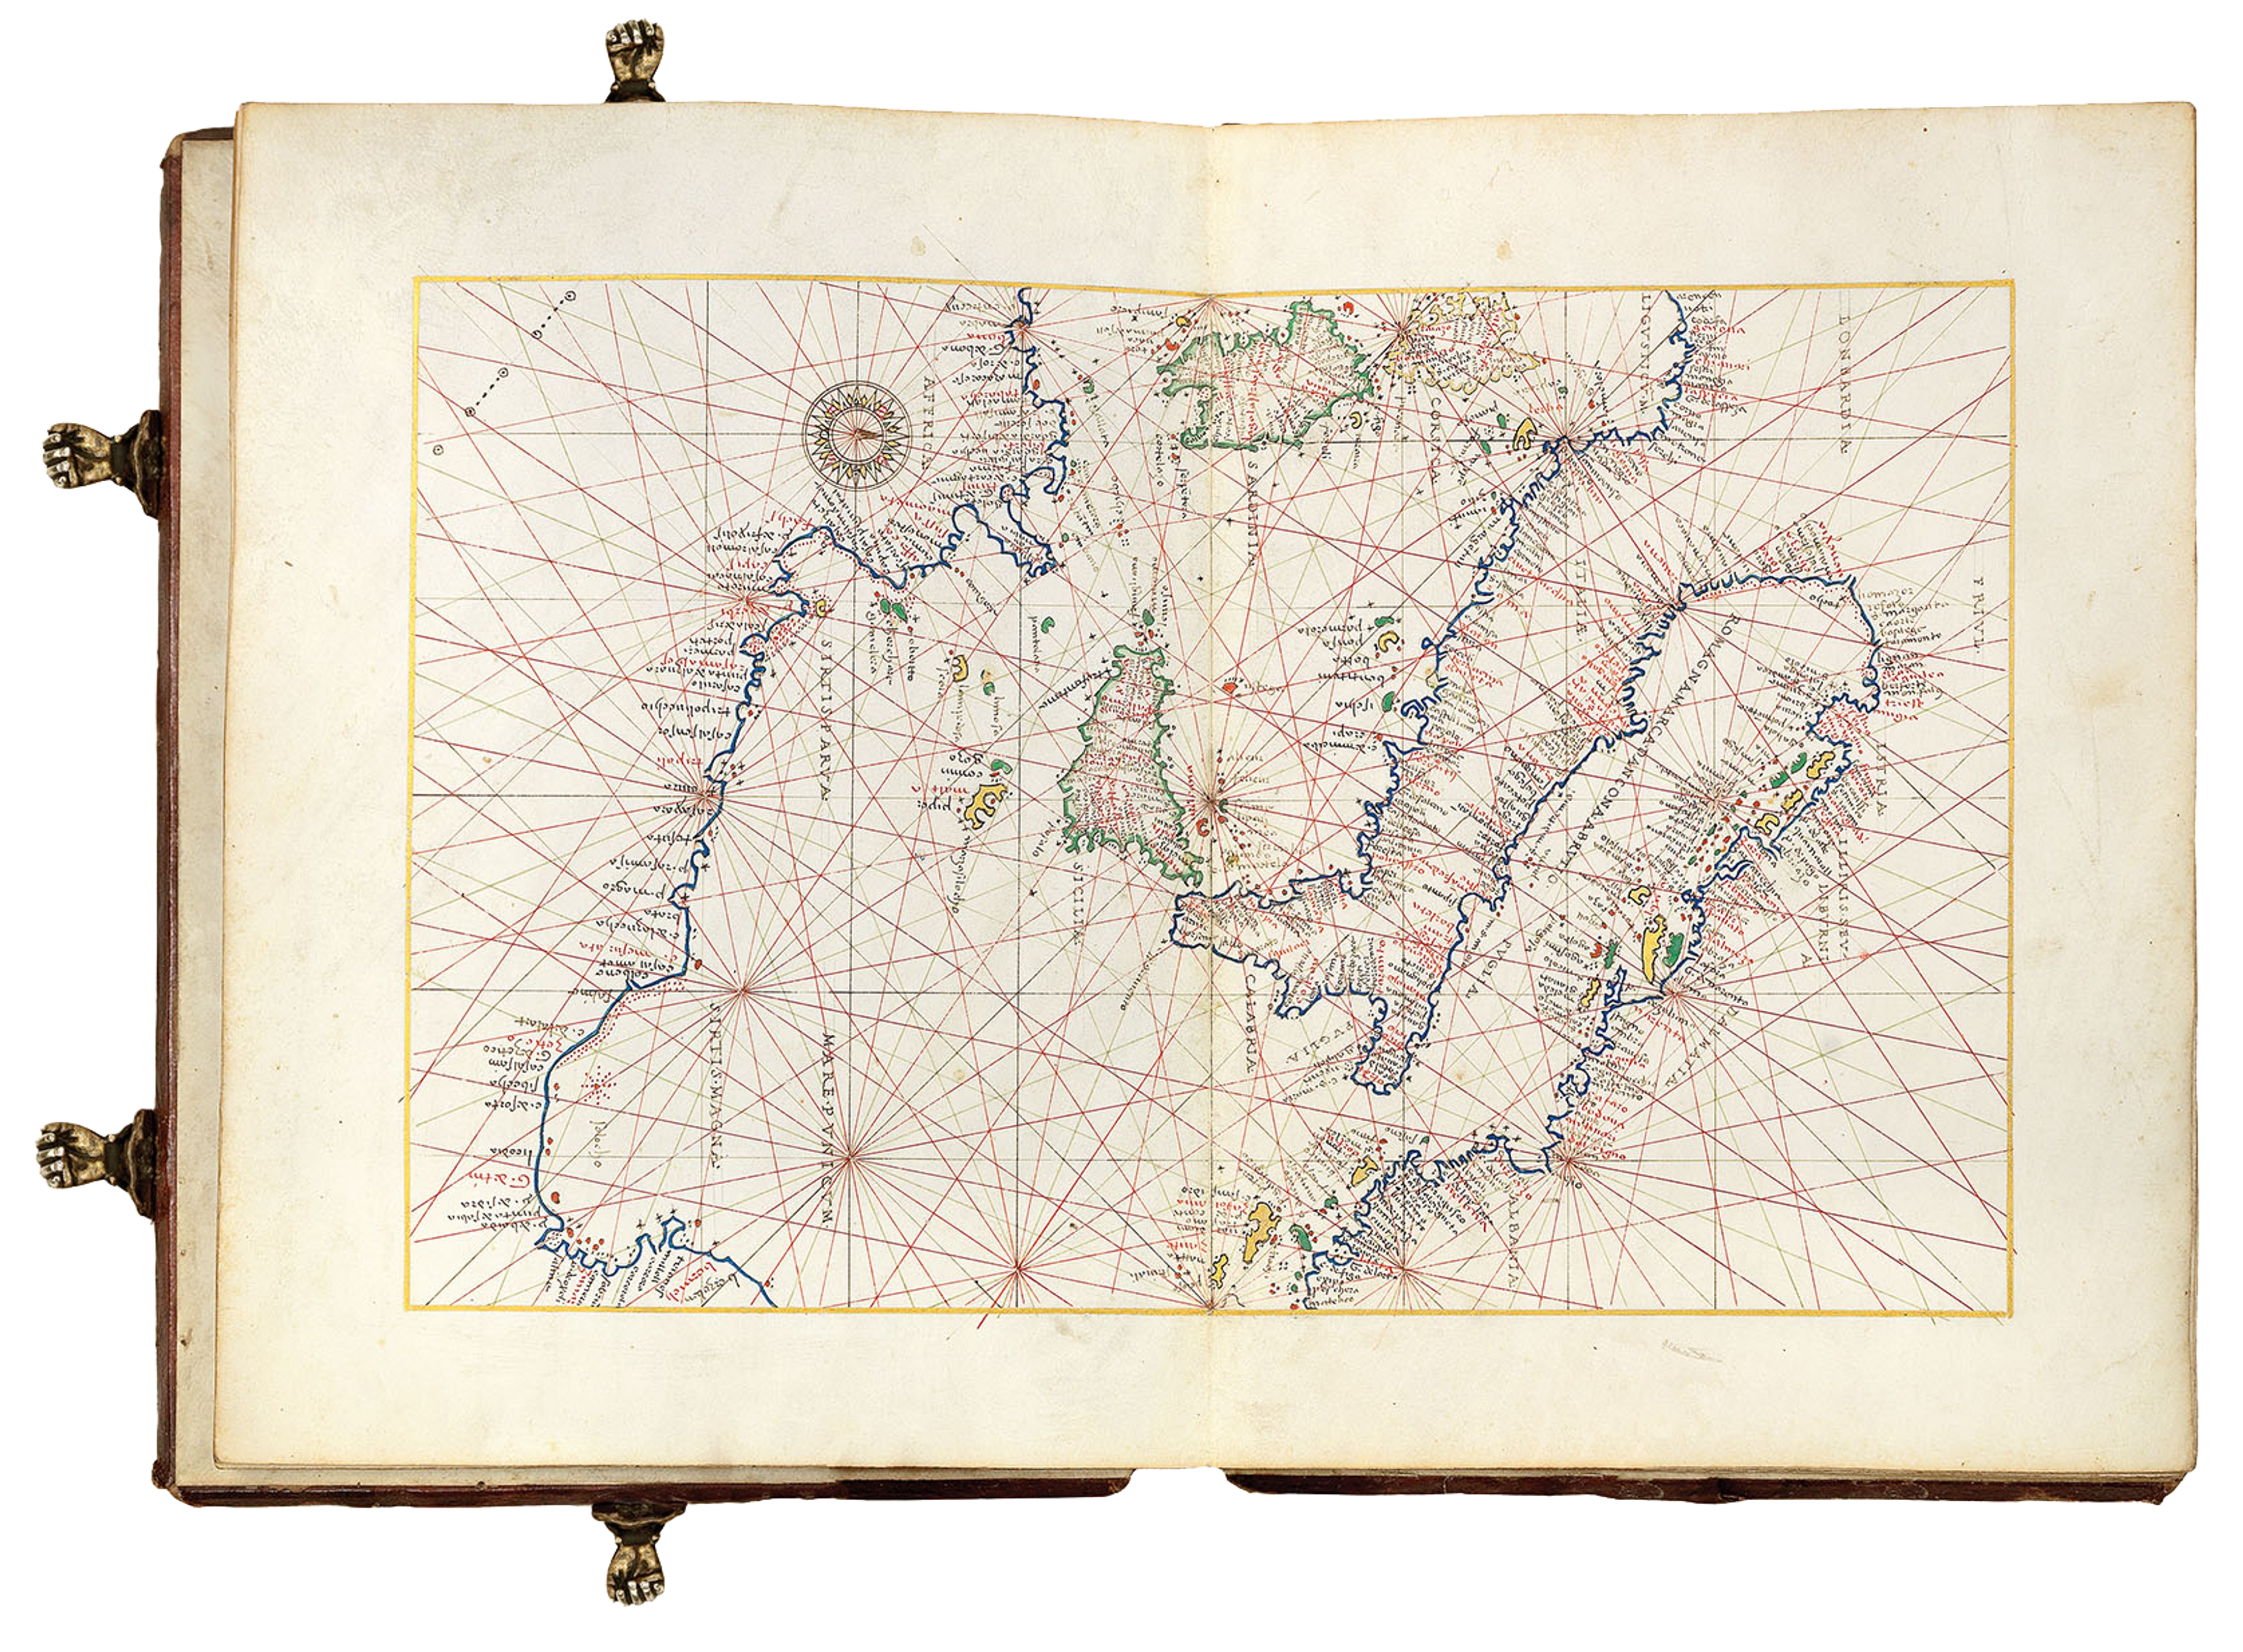 A two-page spread from a portolan atlas with a compass rose on the top left. The map is very detailed and finely drawn by hand showing Italy and part of the Mediterranean Sea. Many rumblines are featured on the map. The names of cities and town are written in tiny letters perpendicular to the coastline. The compass rose is finely drawn with a red central dial.